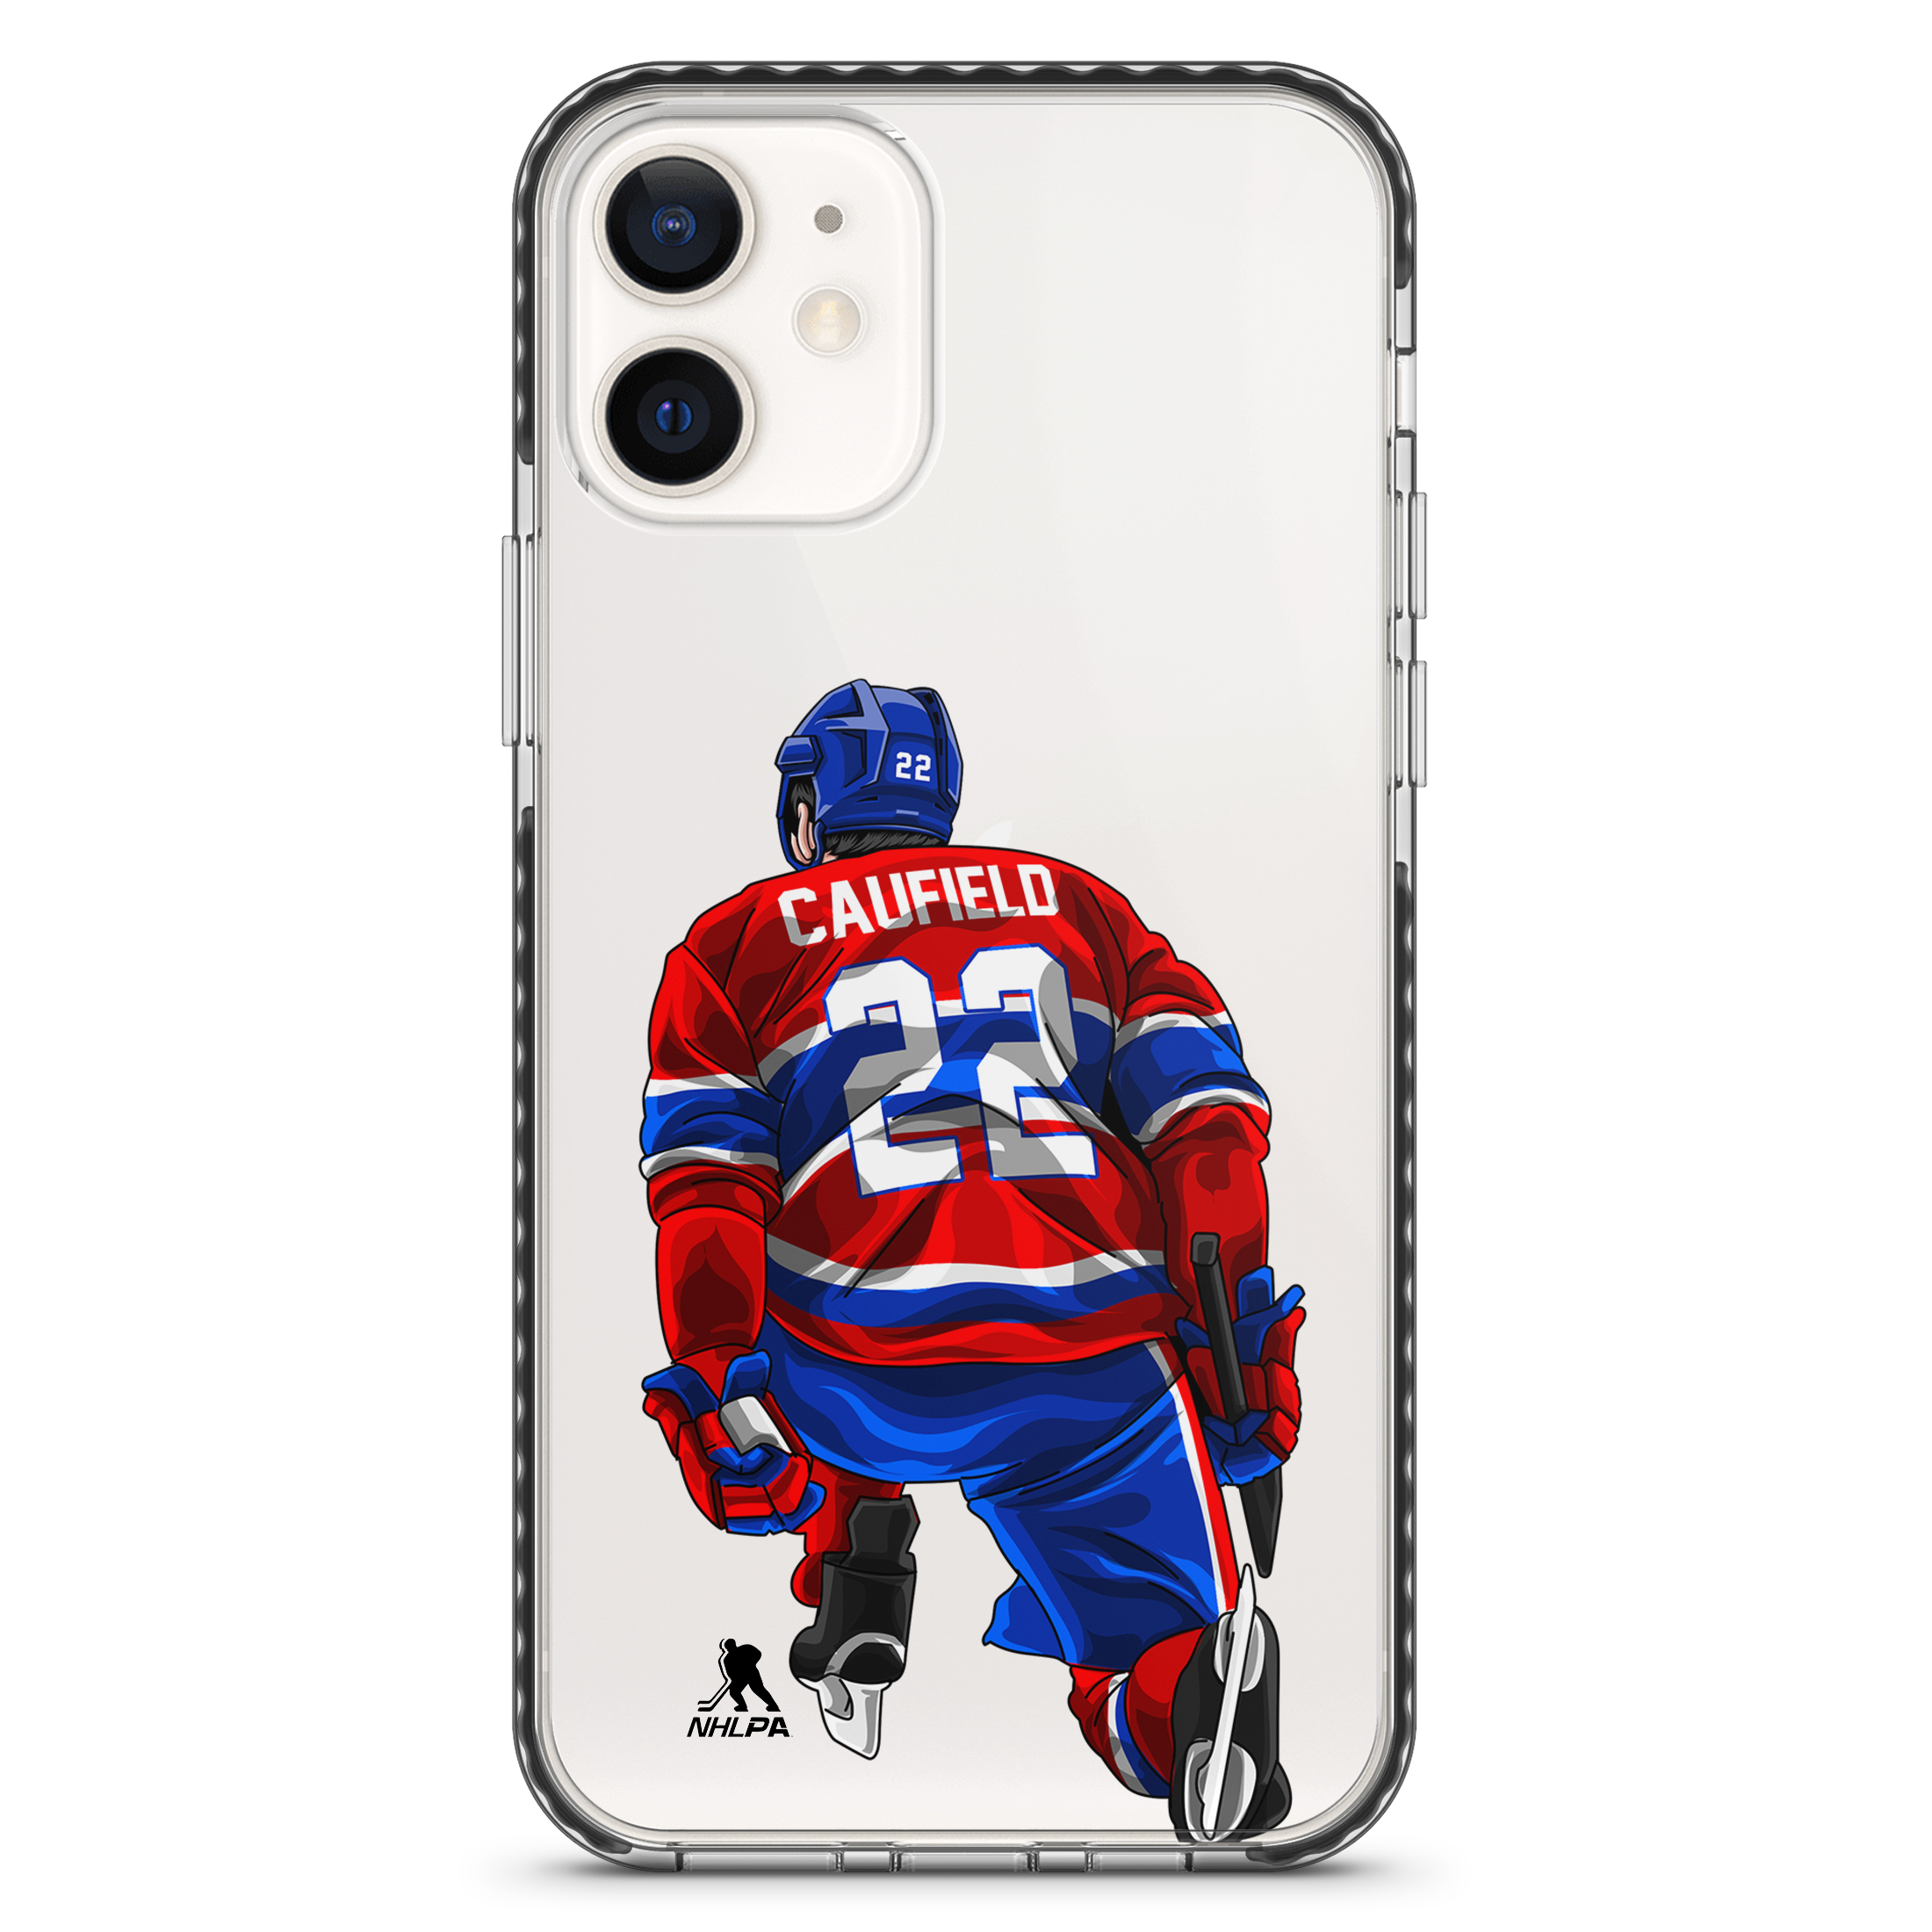 Apple iPhone X - NHL Licensed Montreal Canadiens Red Jersey Textured Back  Cover on Black TPU Skin